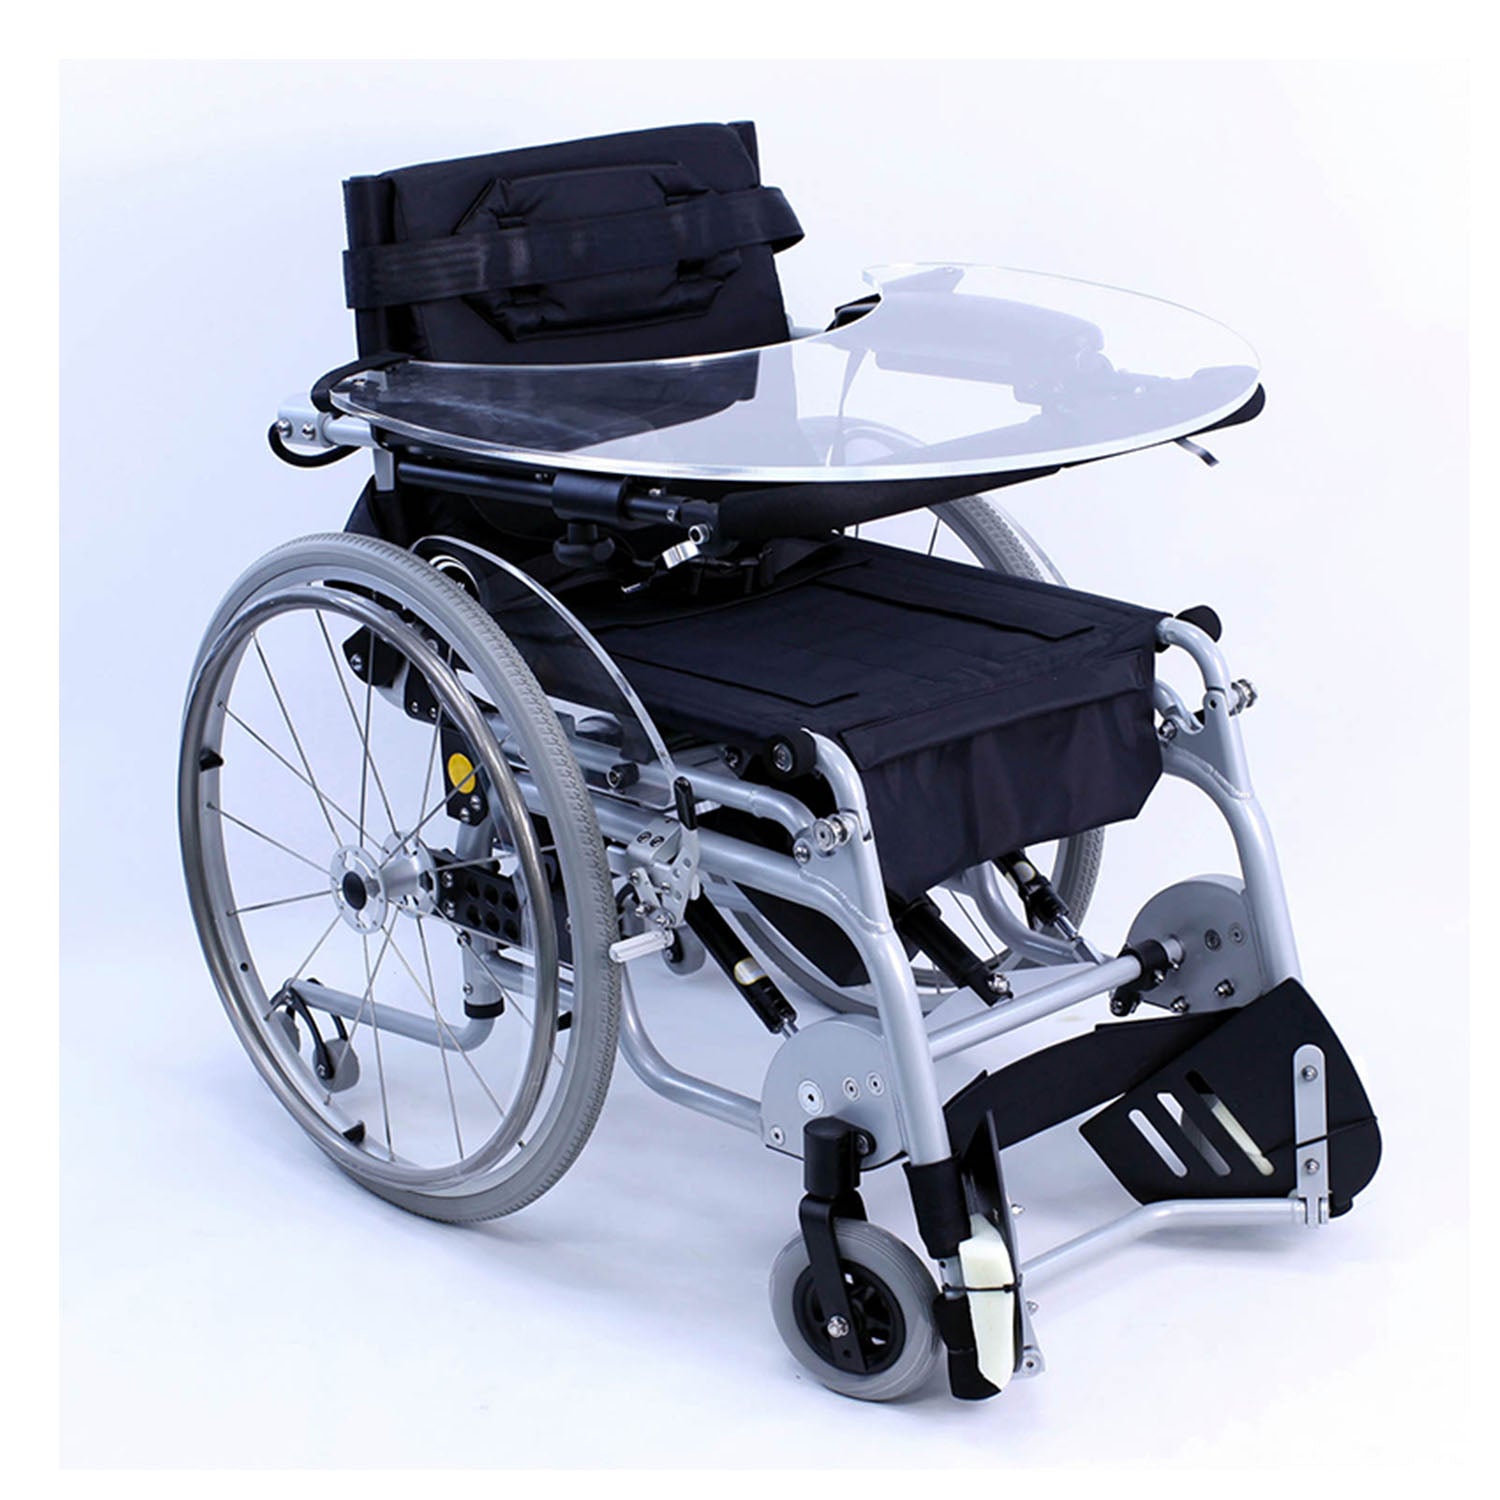 Karman XO-101 Manual Wheelchair, Push Button For Stand-Up Position, 16 inch Wide, Aluminum Frame With Multi Functional Tray